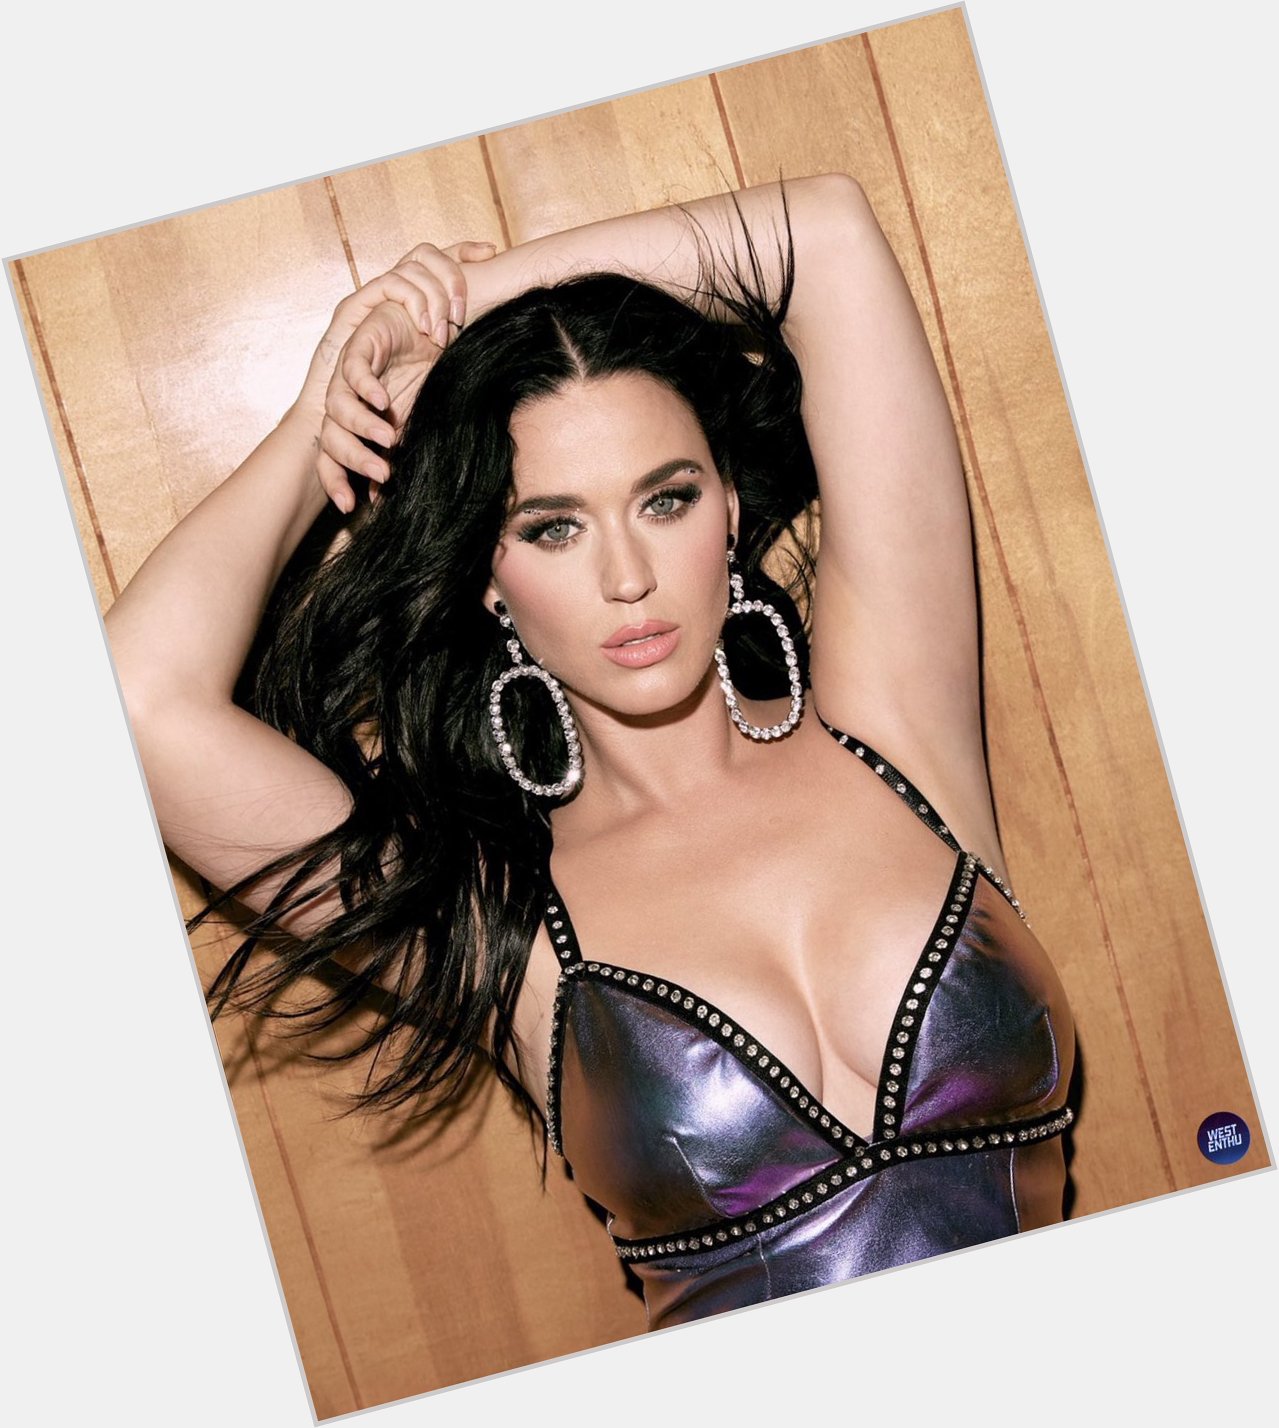 Wst katy perry stuns in her newest photoshoot.

ALSO, HAPPY BIRTHDAY KATY PERRY 